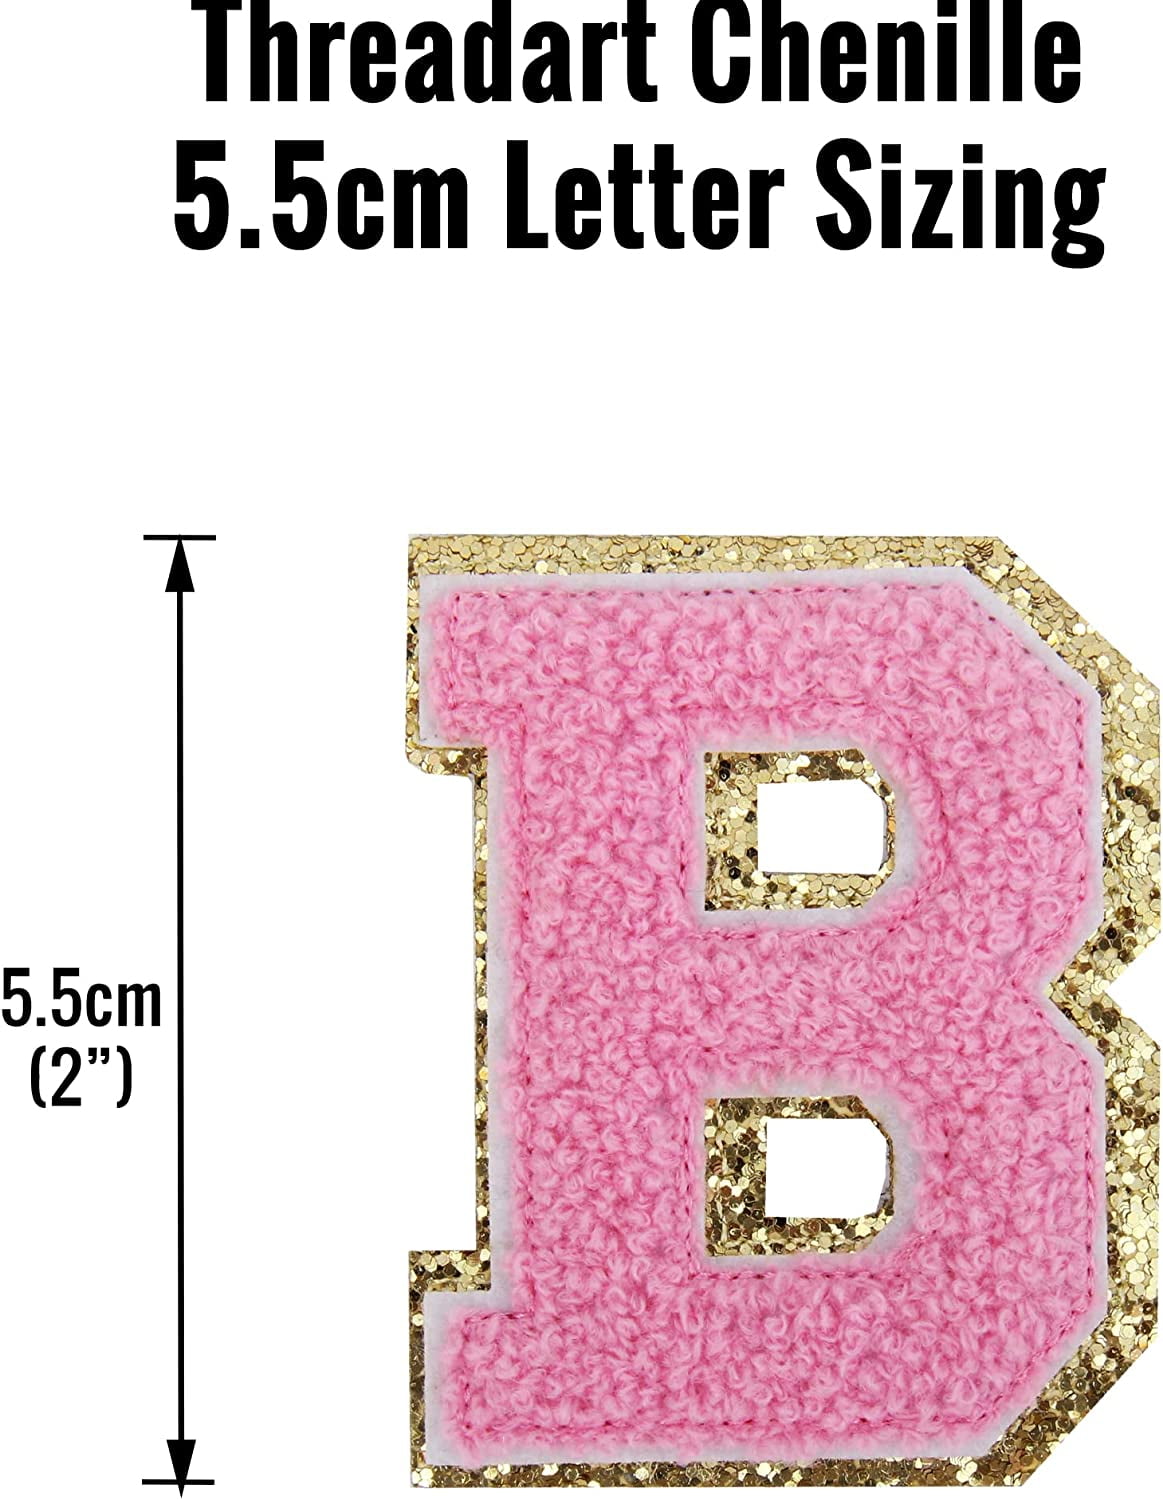 26 Letter Set Chenille Iron On Glitter Varsity Letter Patches - Blue  Chenille Fabric With Gold Glitter Trim - Sew or Iron on - 5.5 cm Tall 